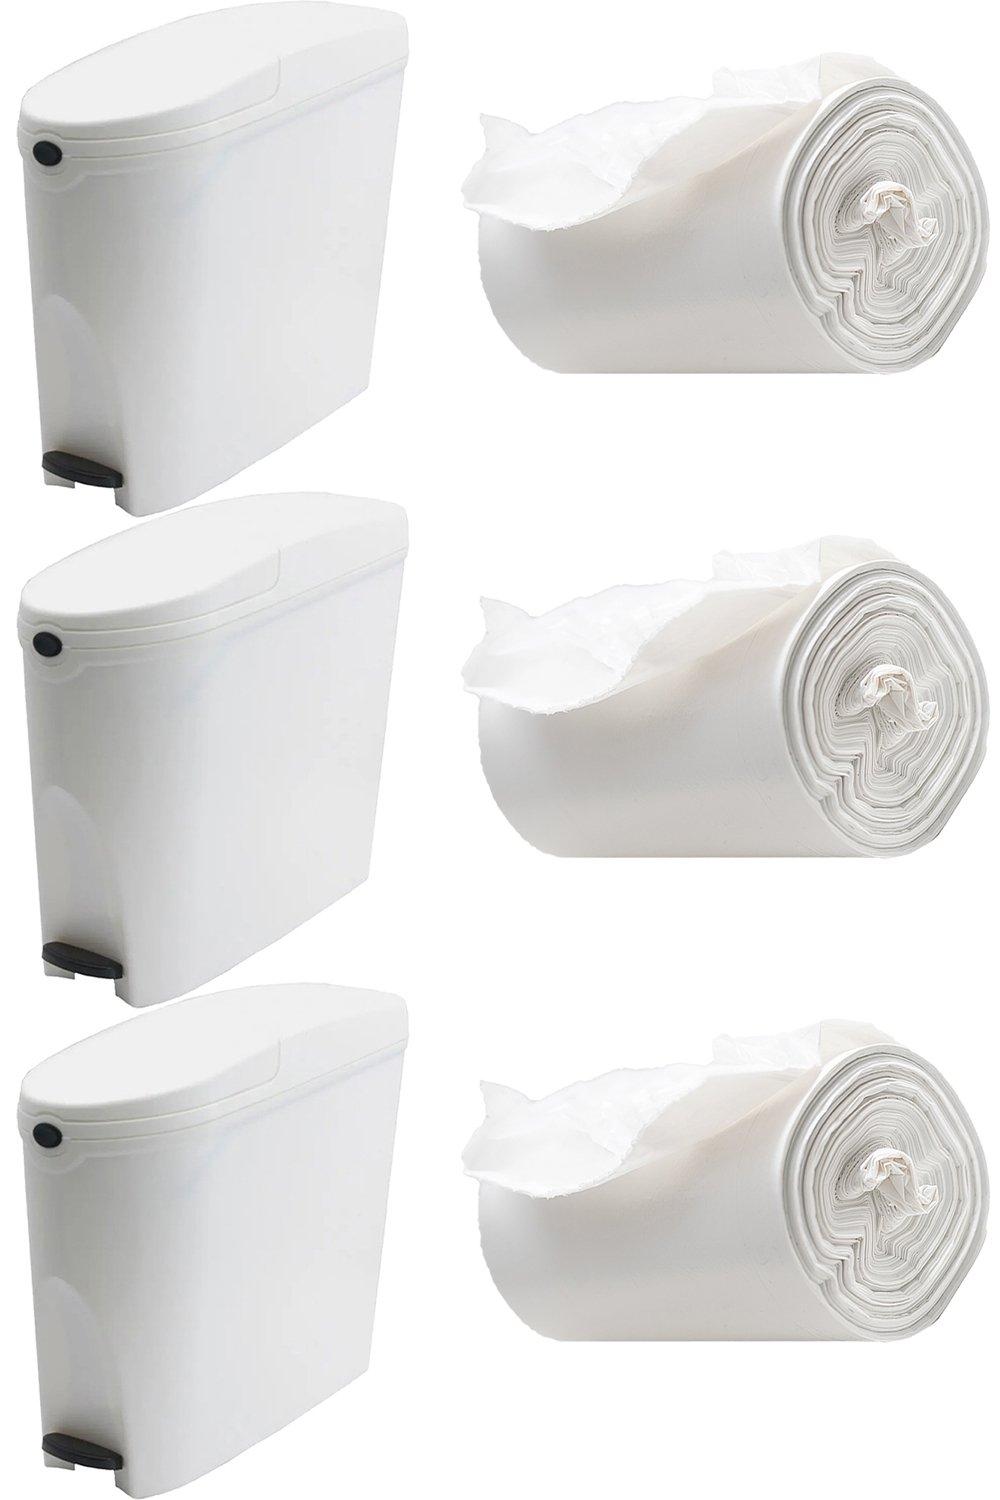 White Pedal Operated Toilet Sanitary Bin 3 x 20L Capacity & 150 Liners